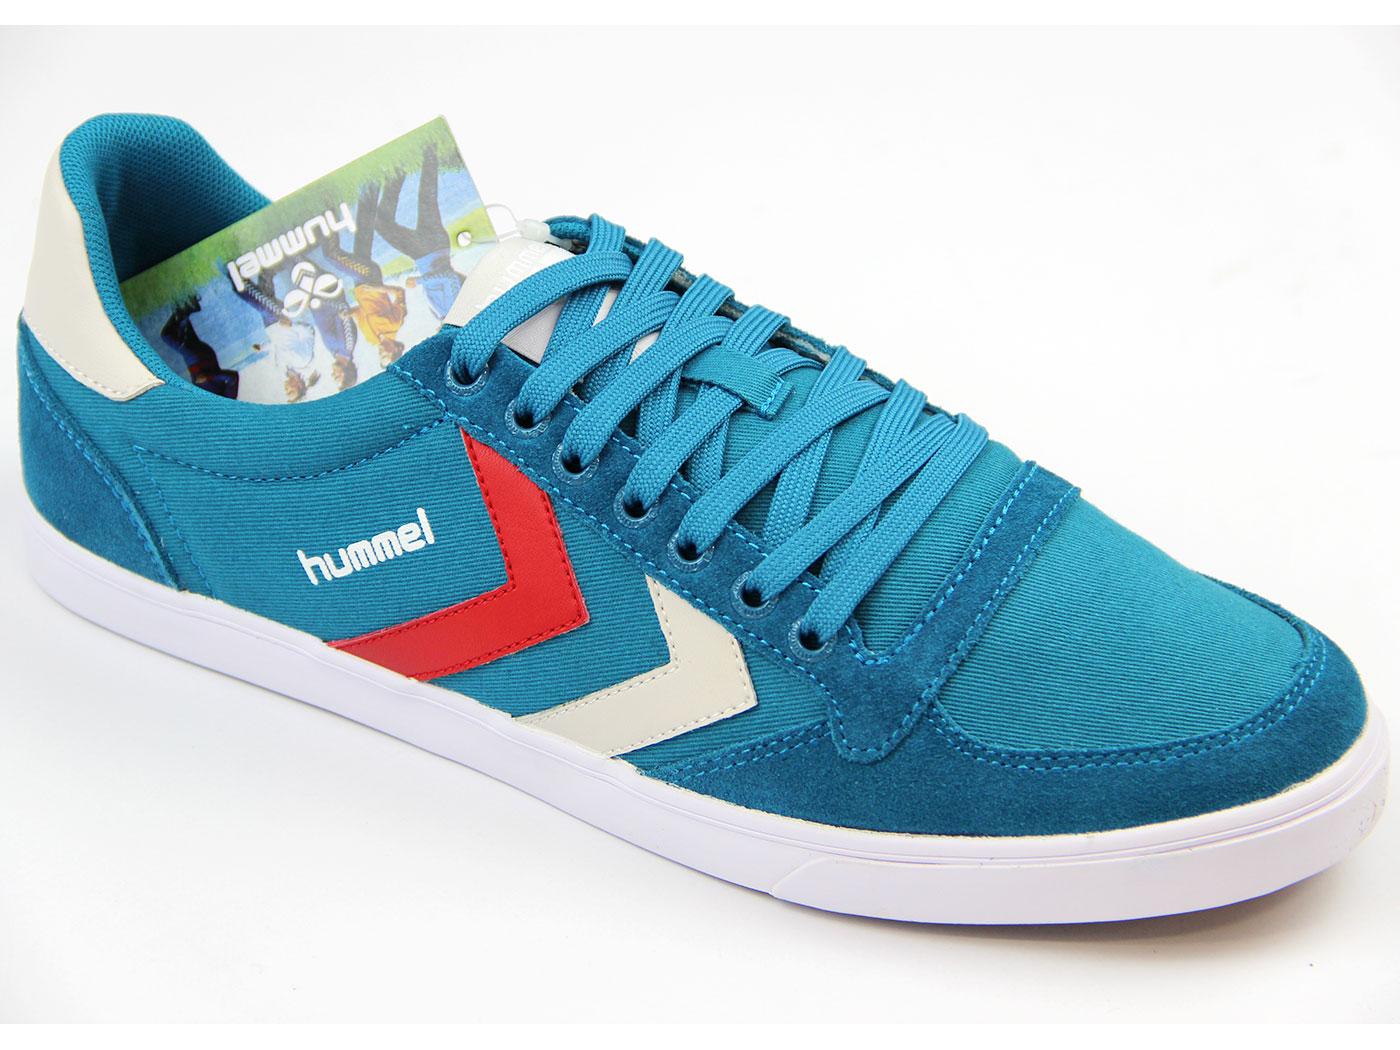 HUMMEL Slimmer Stadil Low Canvas Retro Trainers OD